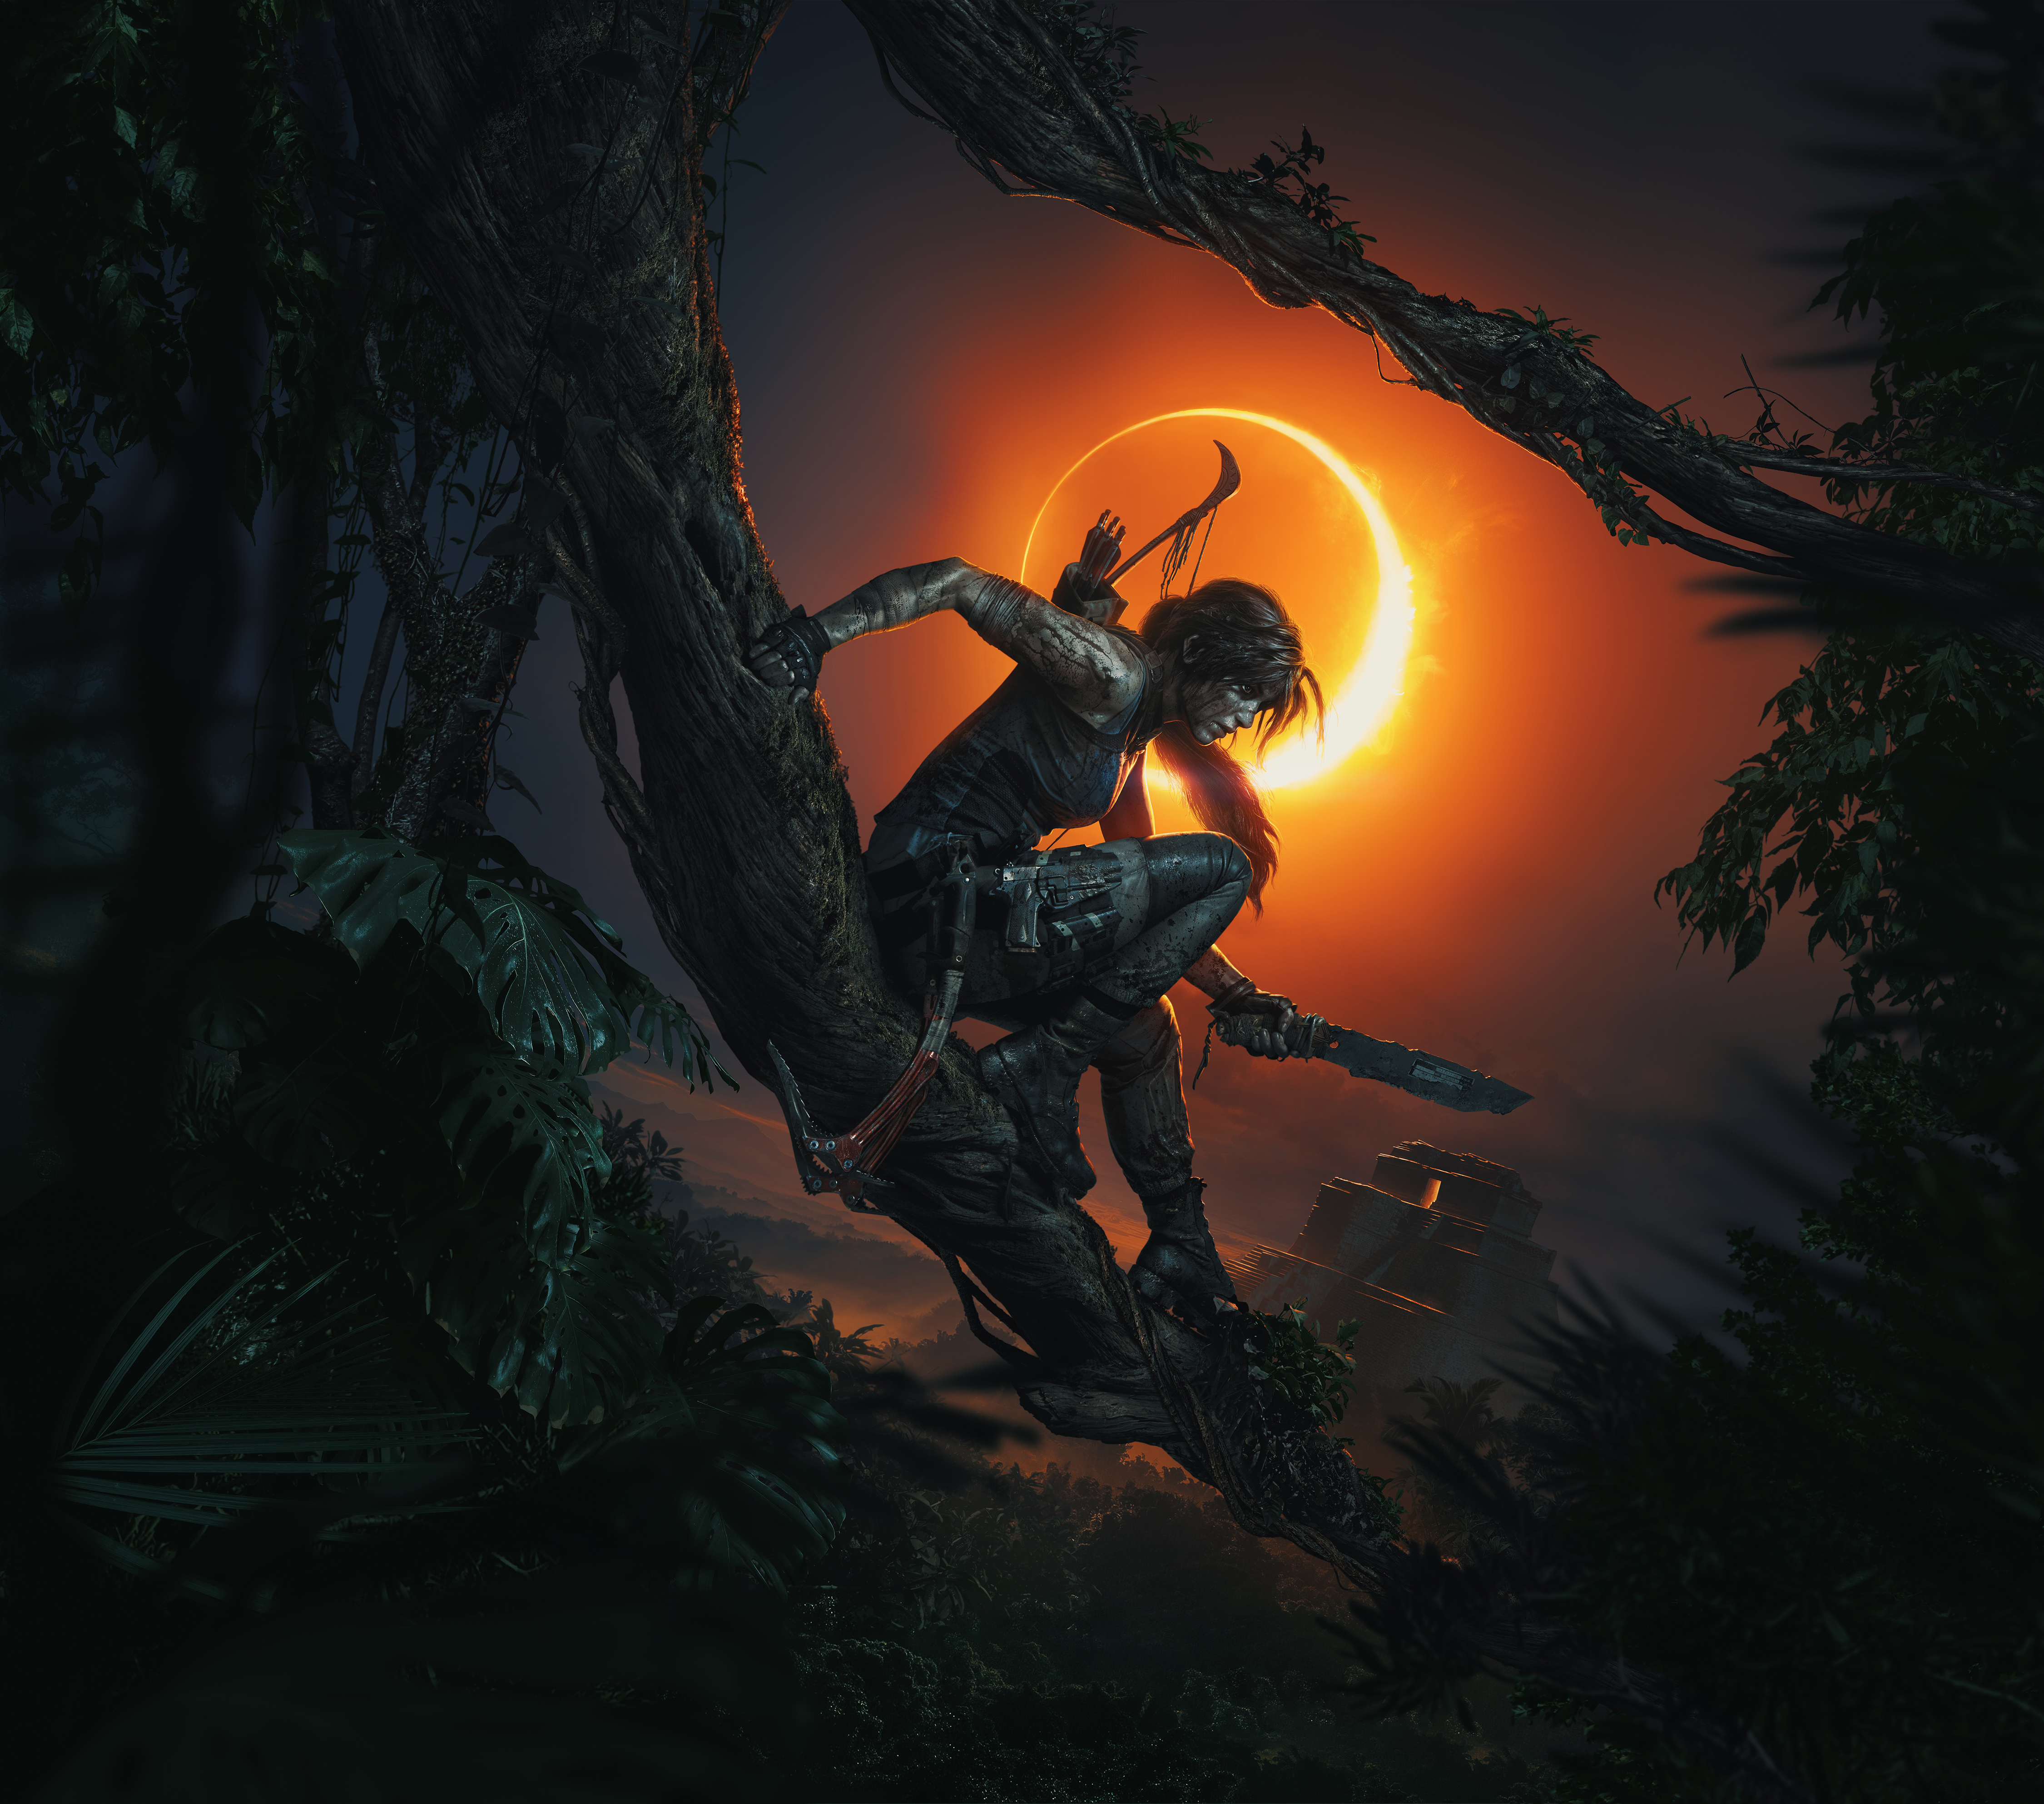 General 4500x3971 Shadow of the Tomb Raider Tomb Raider artwork jungle eclipse  video games Lara Croft (Tomb Raider) video game girls video game art video game characters PC gaming